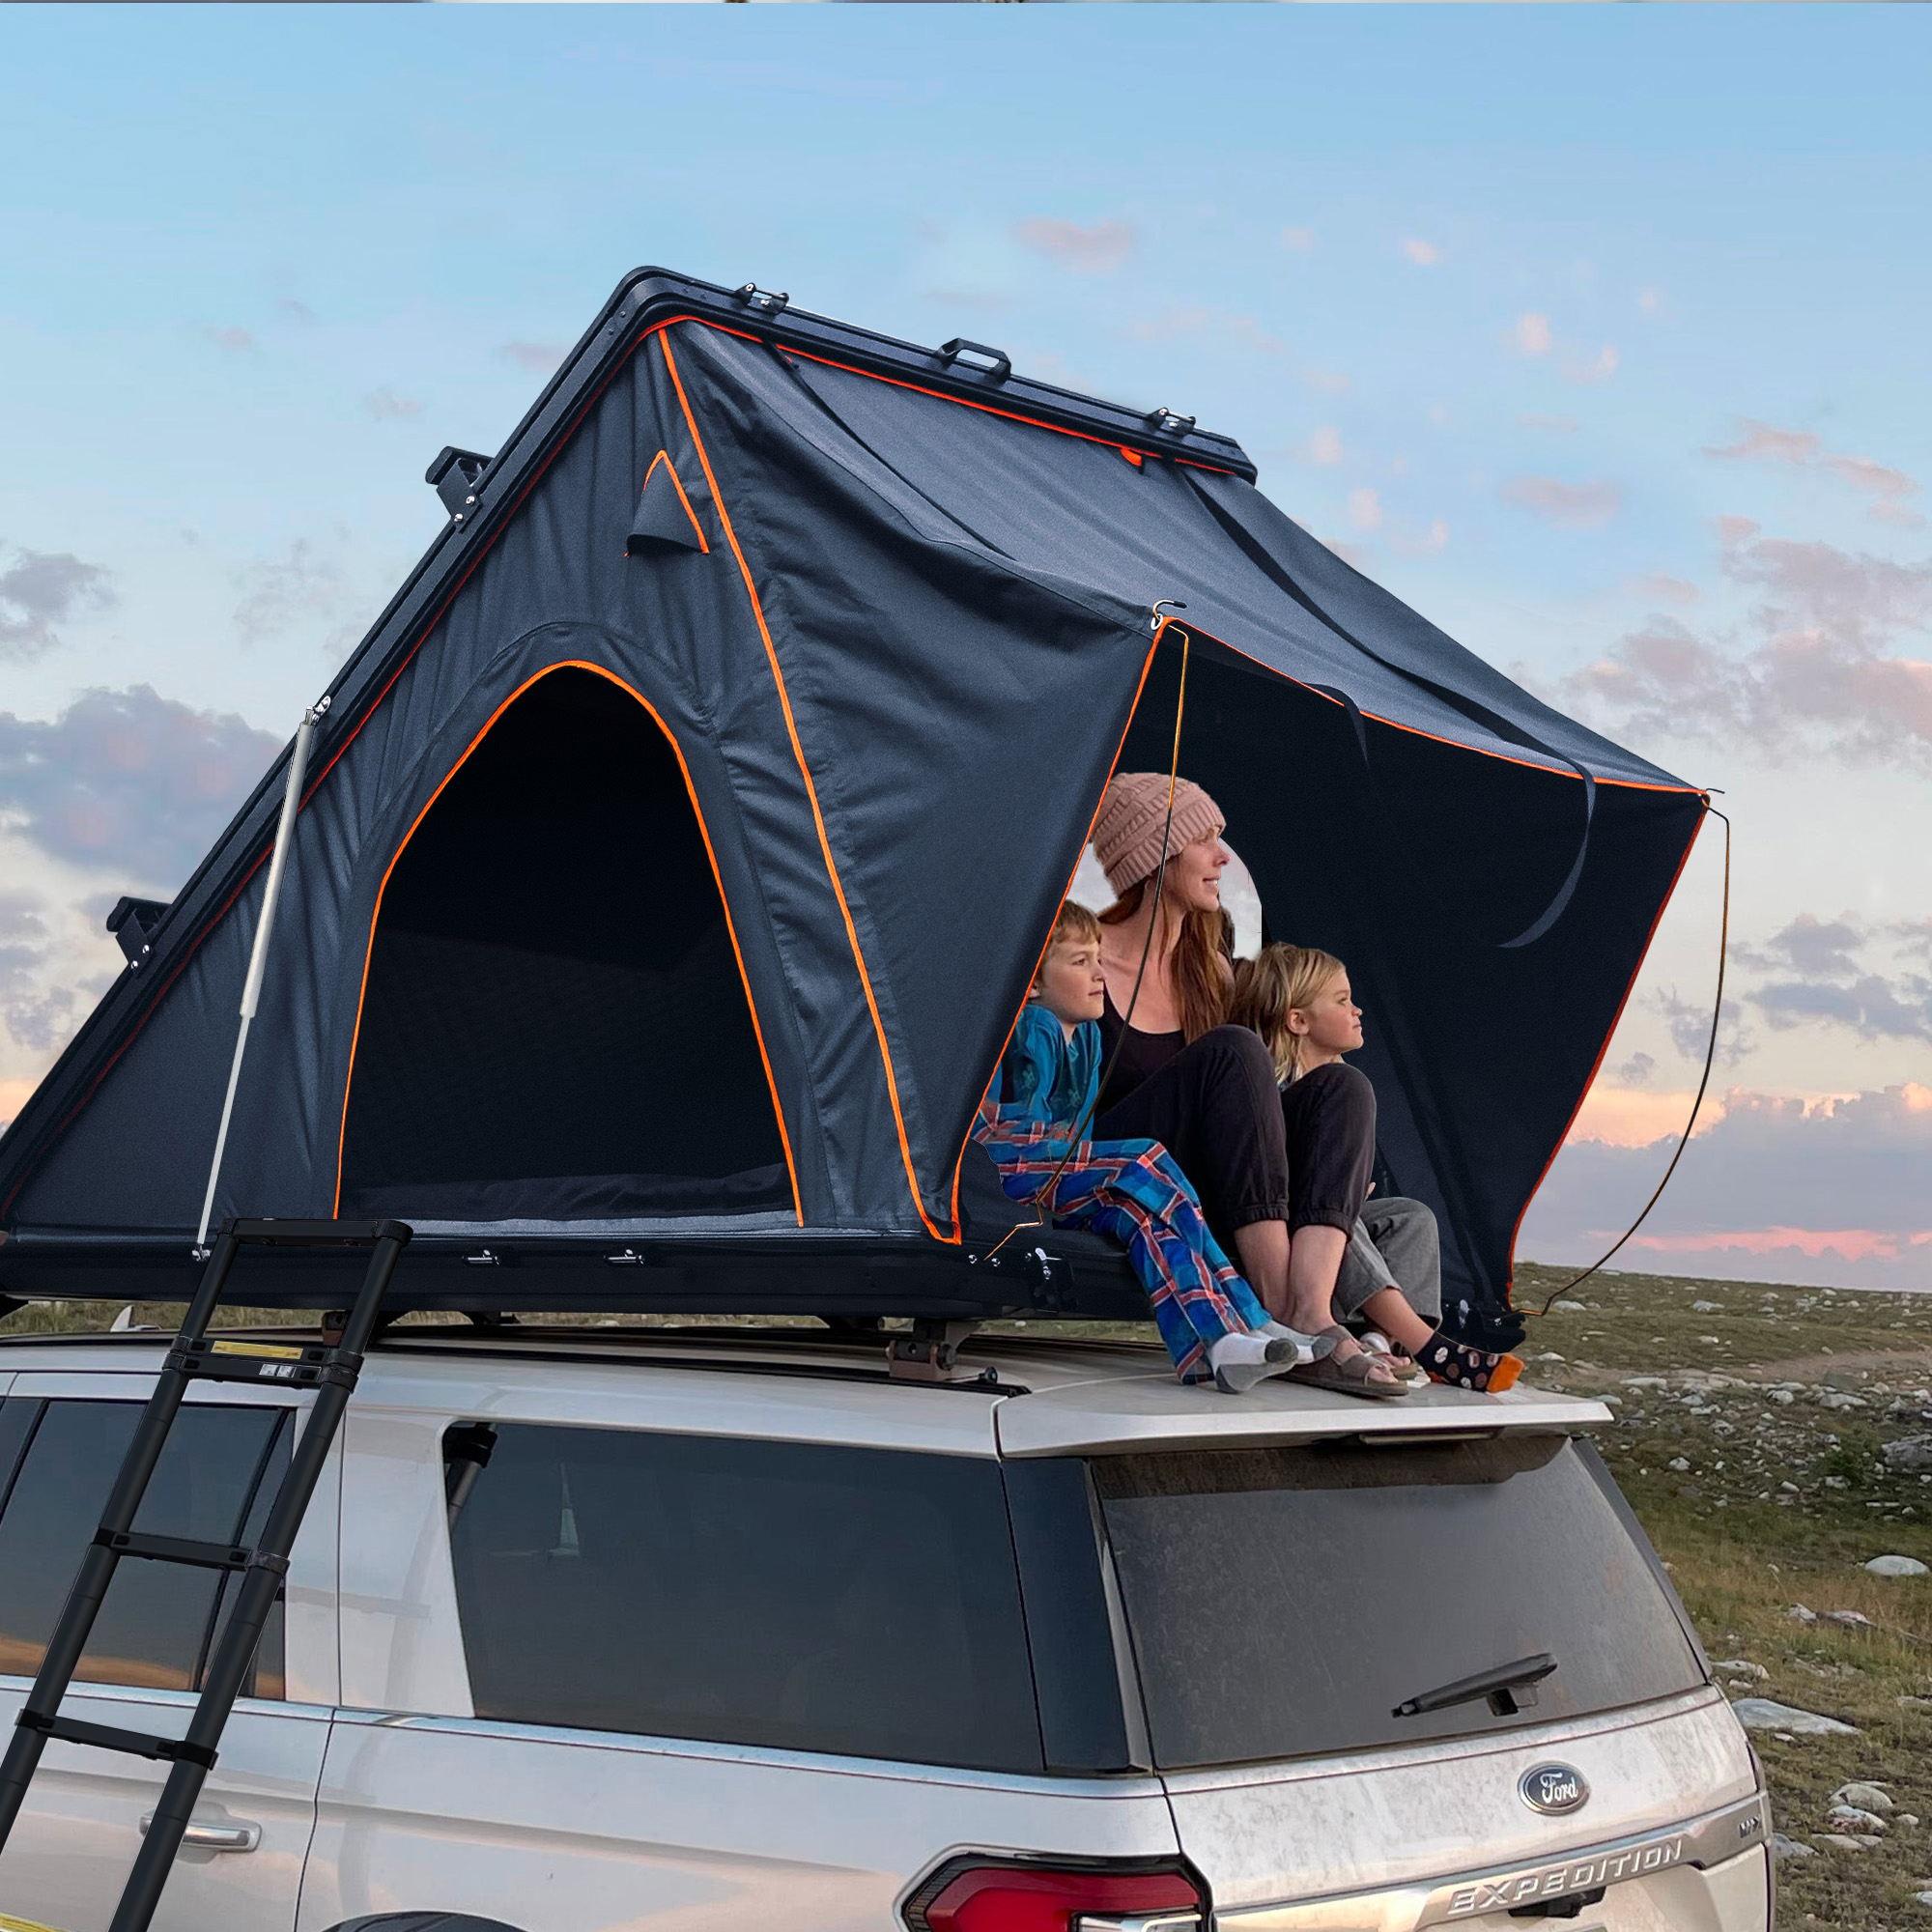 Is it safe to sleep in a roof top tent?